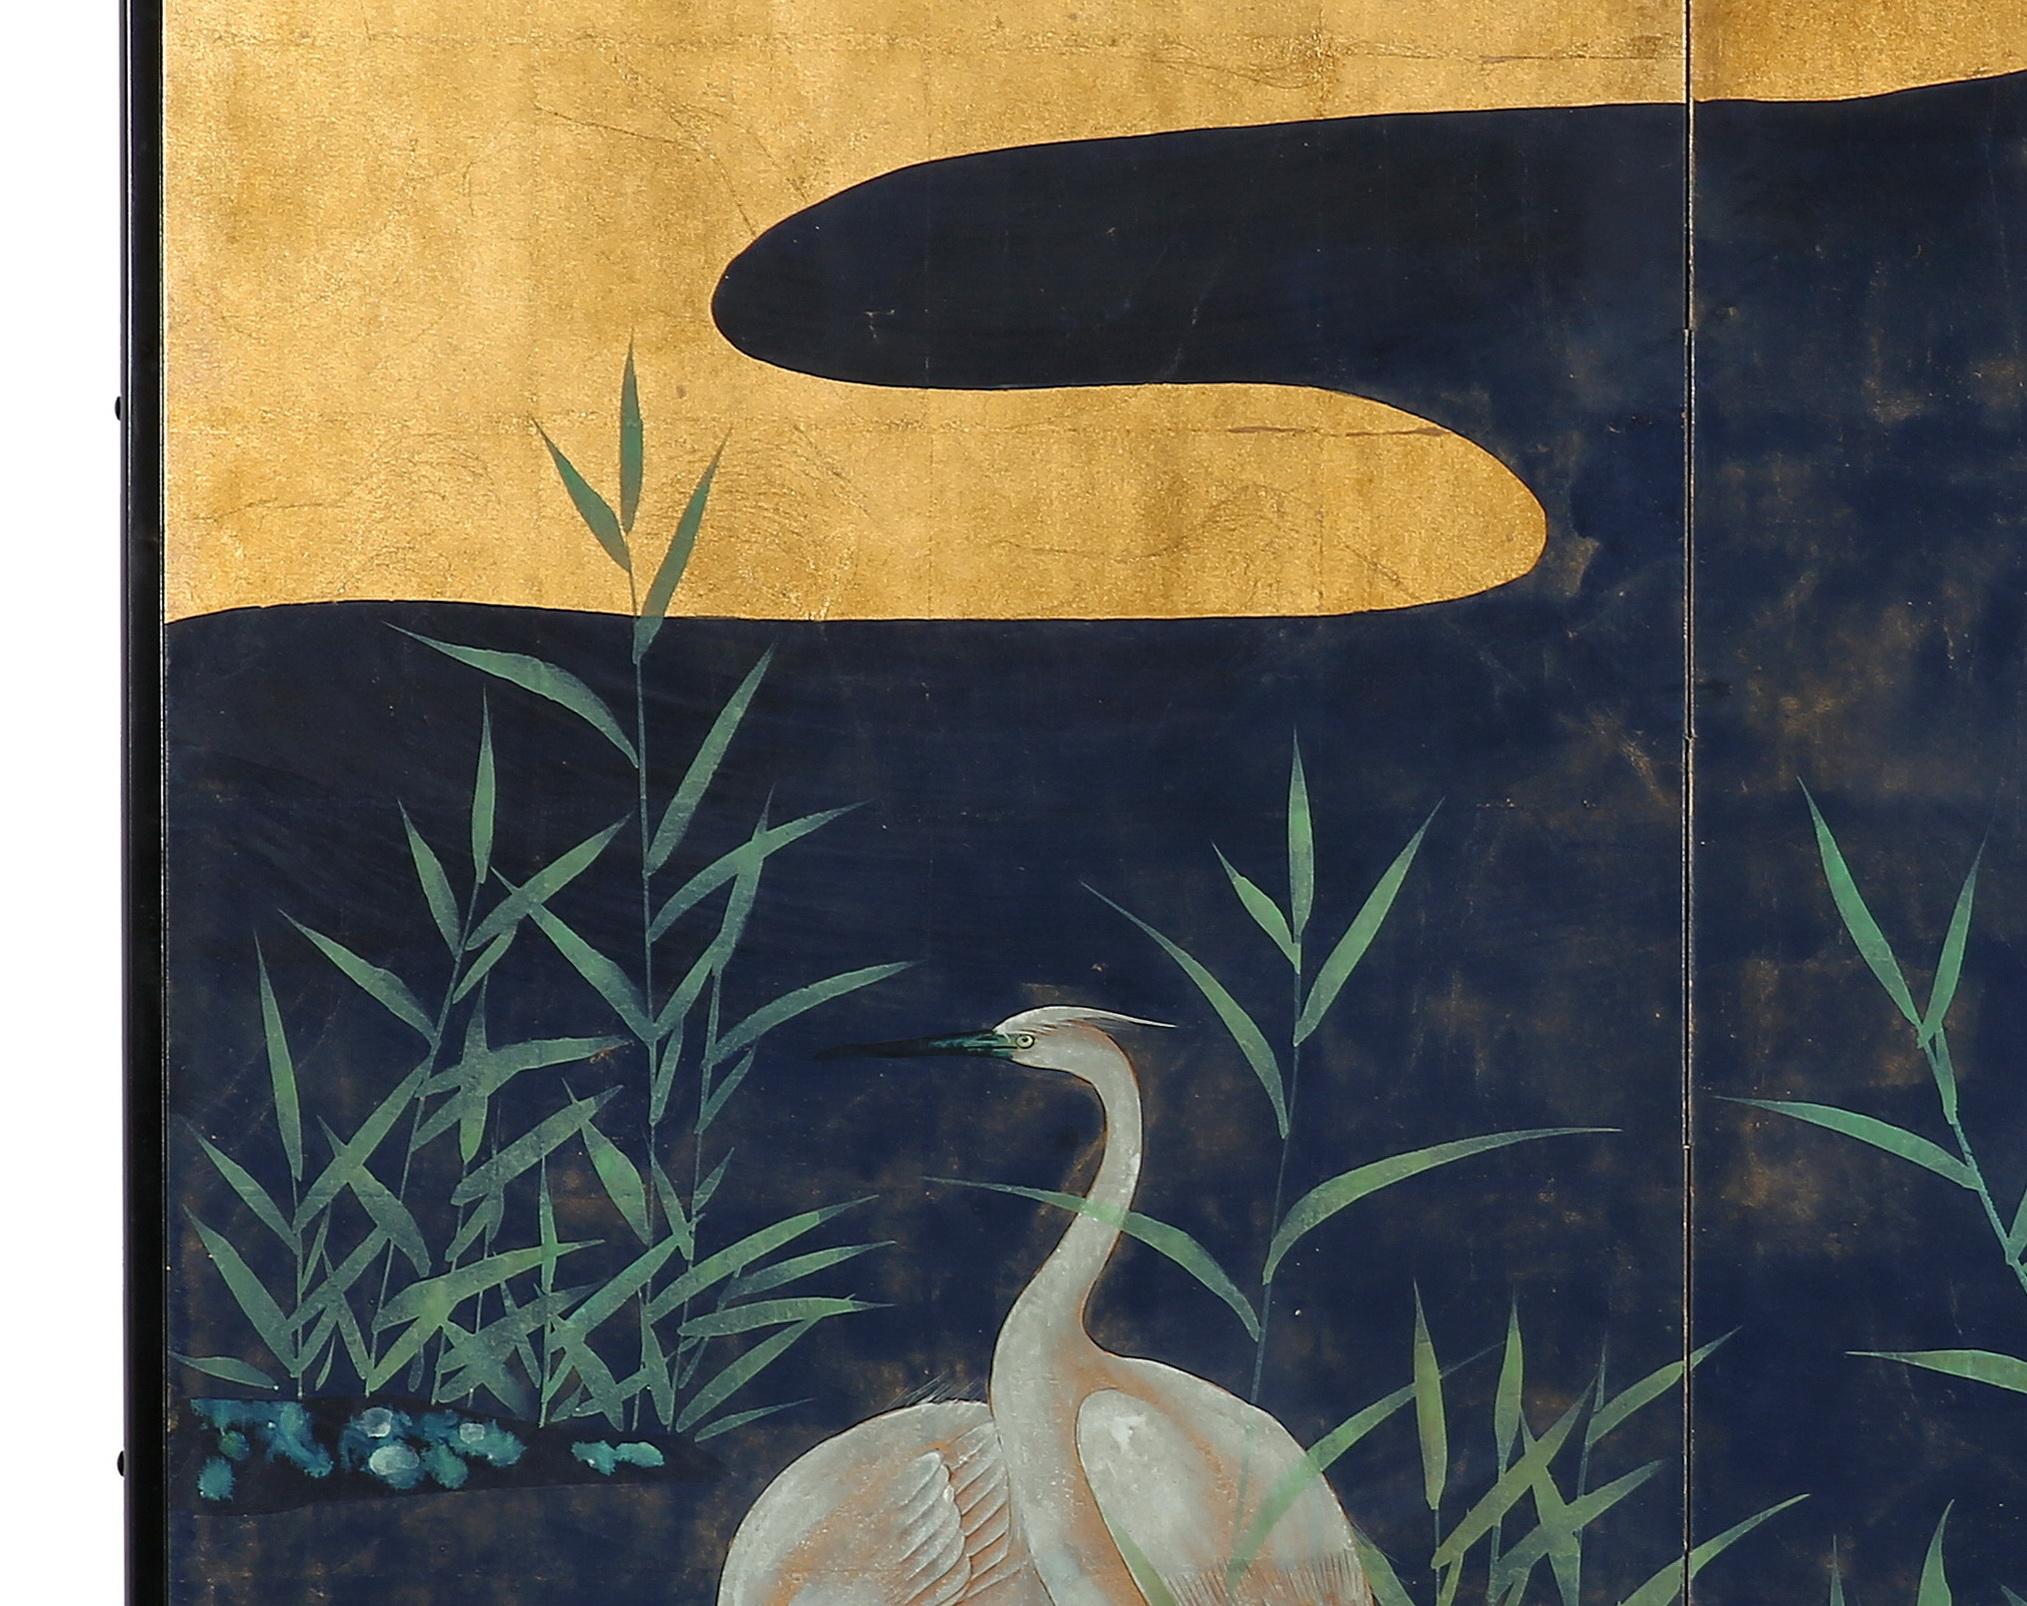 The cranes by the reeds painting of this two-panel screen is hand painted in watercolor, on squares of gold leaf which are applied by hand to the paper base over carefully jointed wooden lattice frames. Lacquer rails are then applied to the